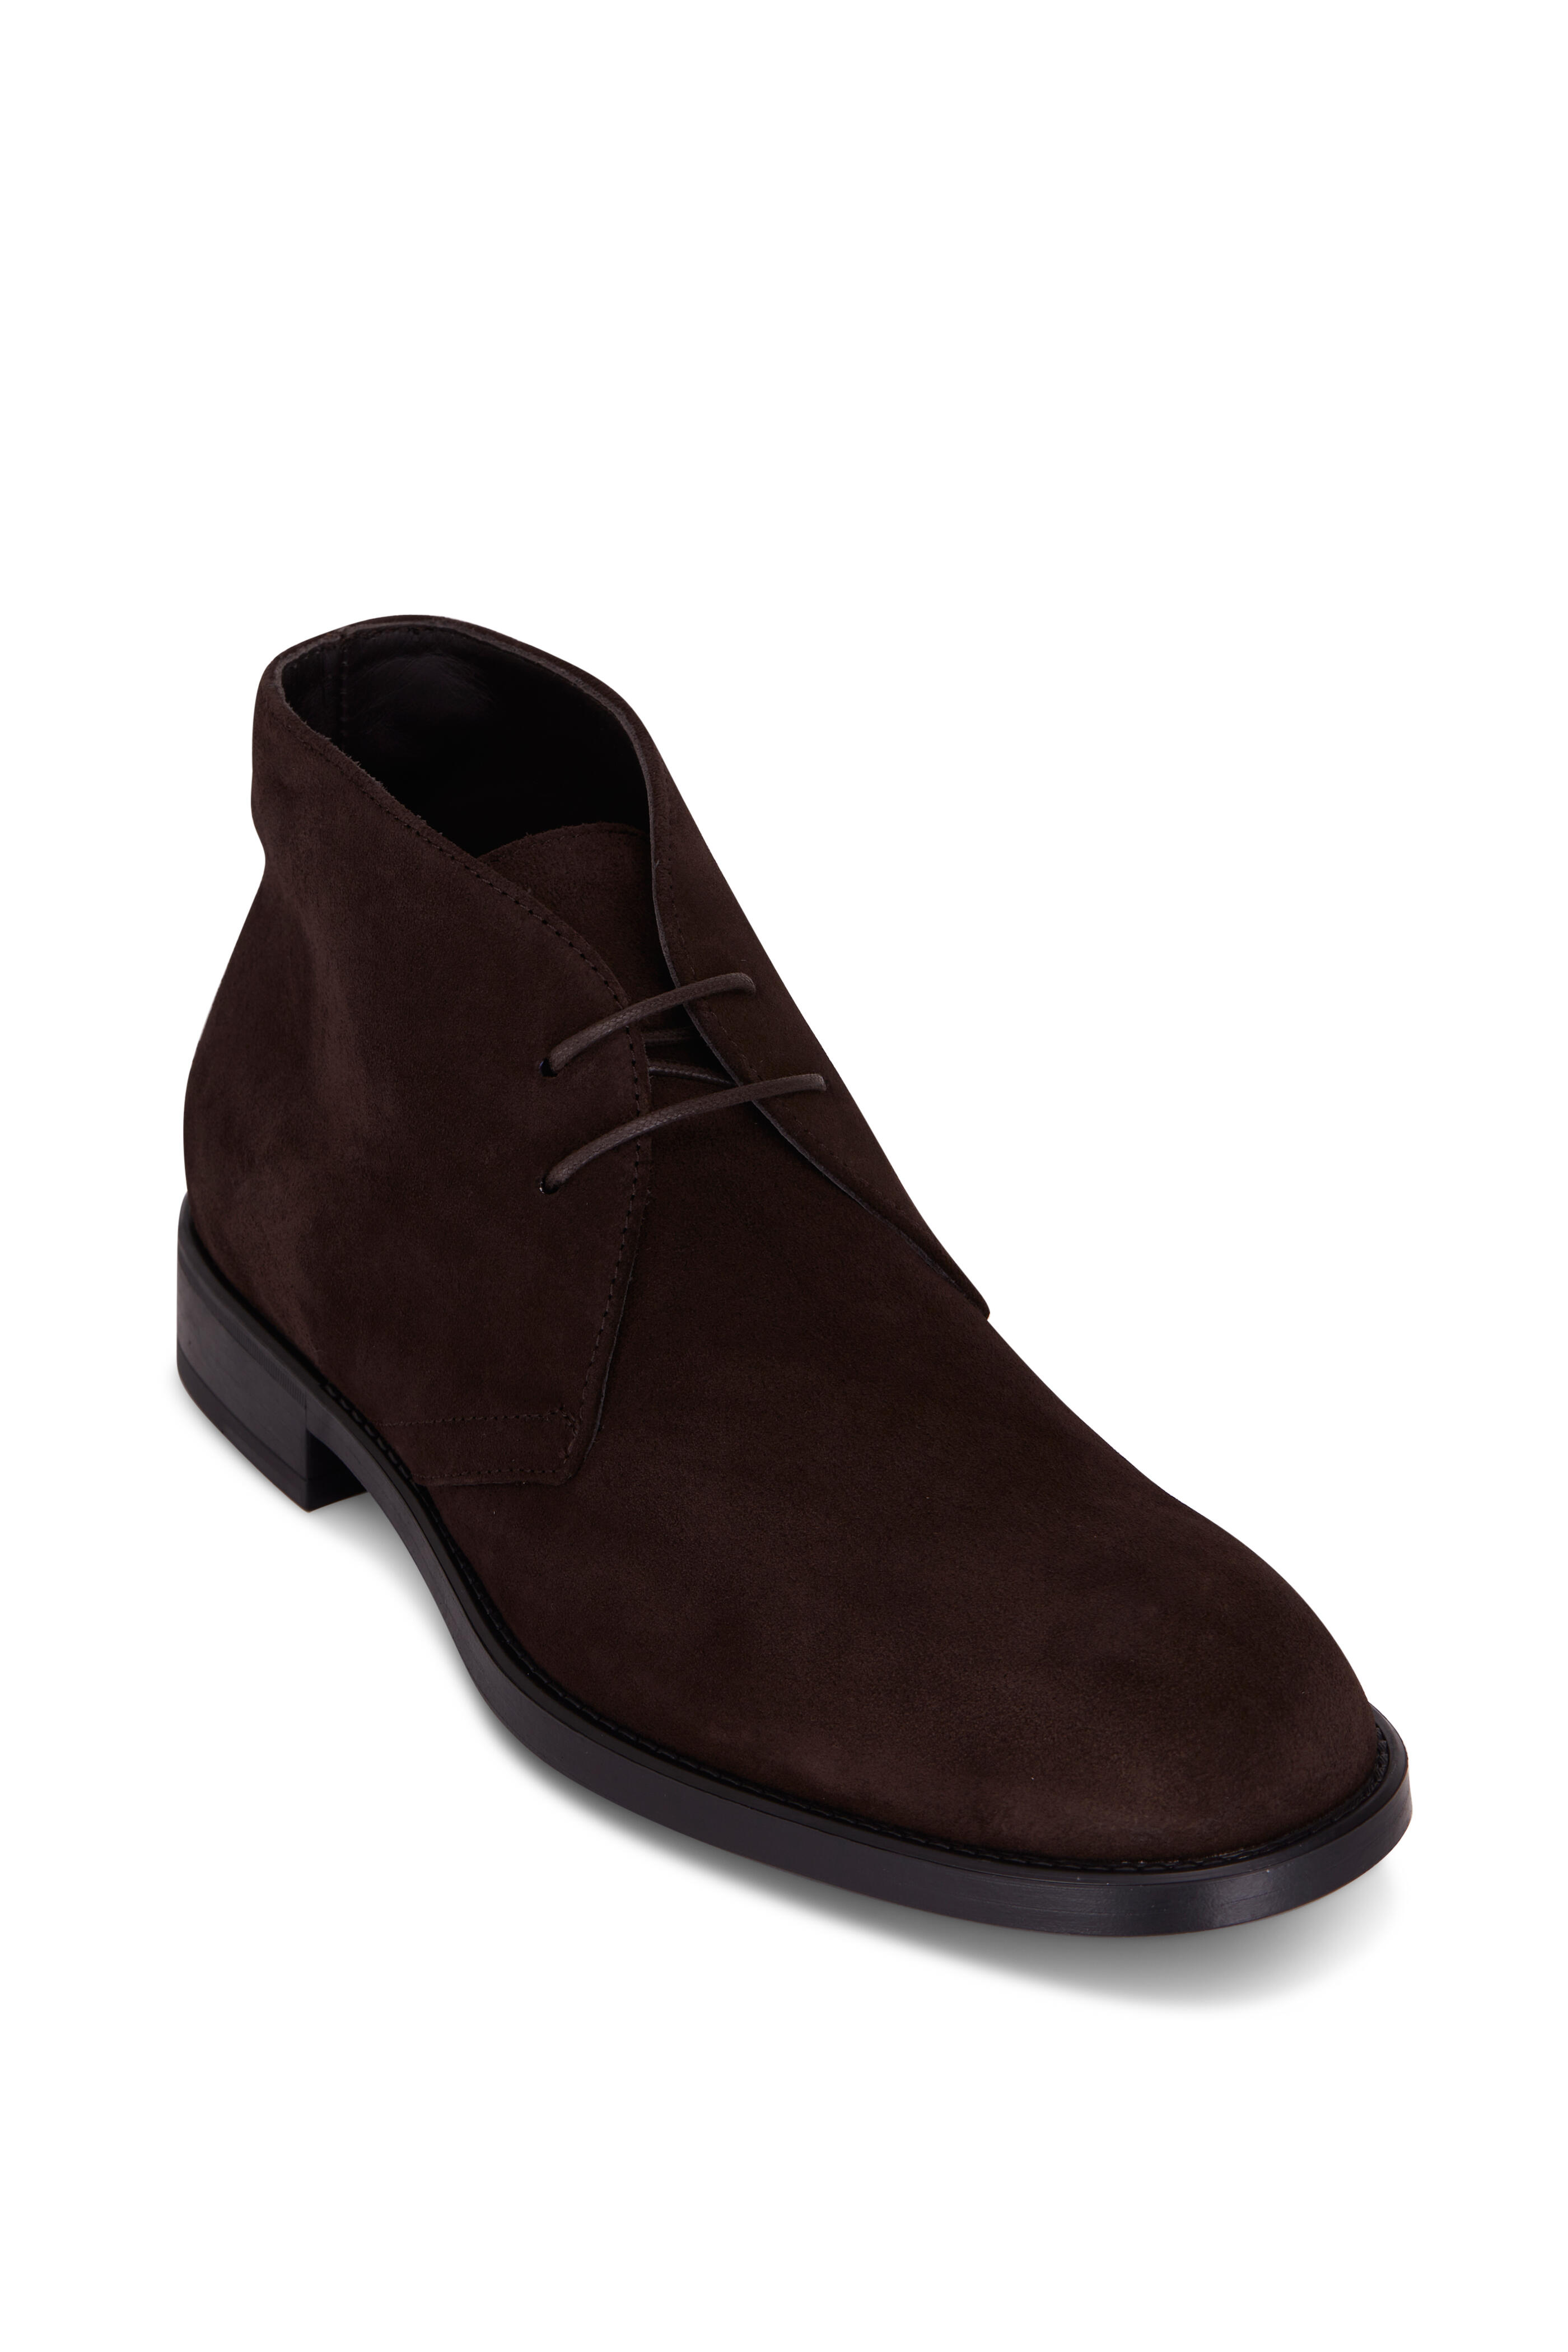 Tom Ford - Brown Suede Chukka Boot | Mitchell Stores